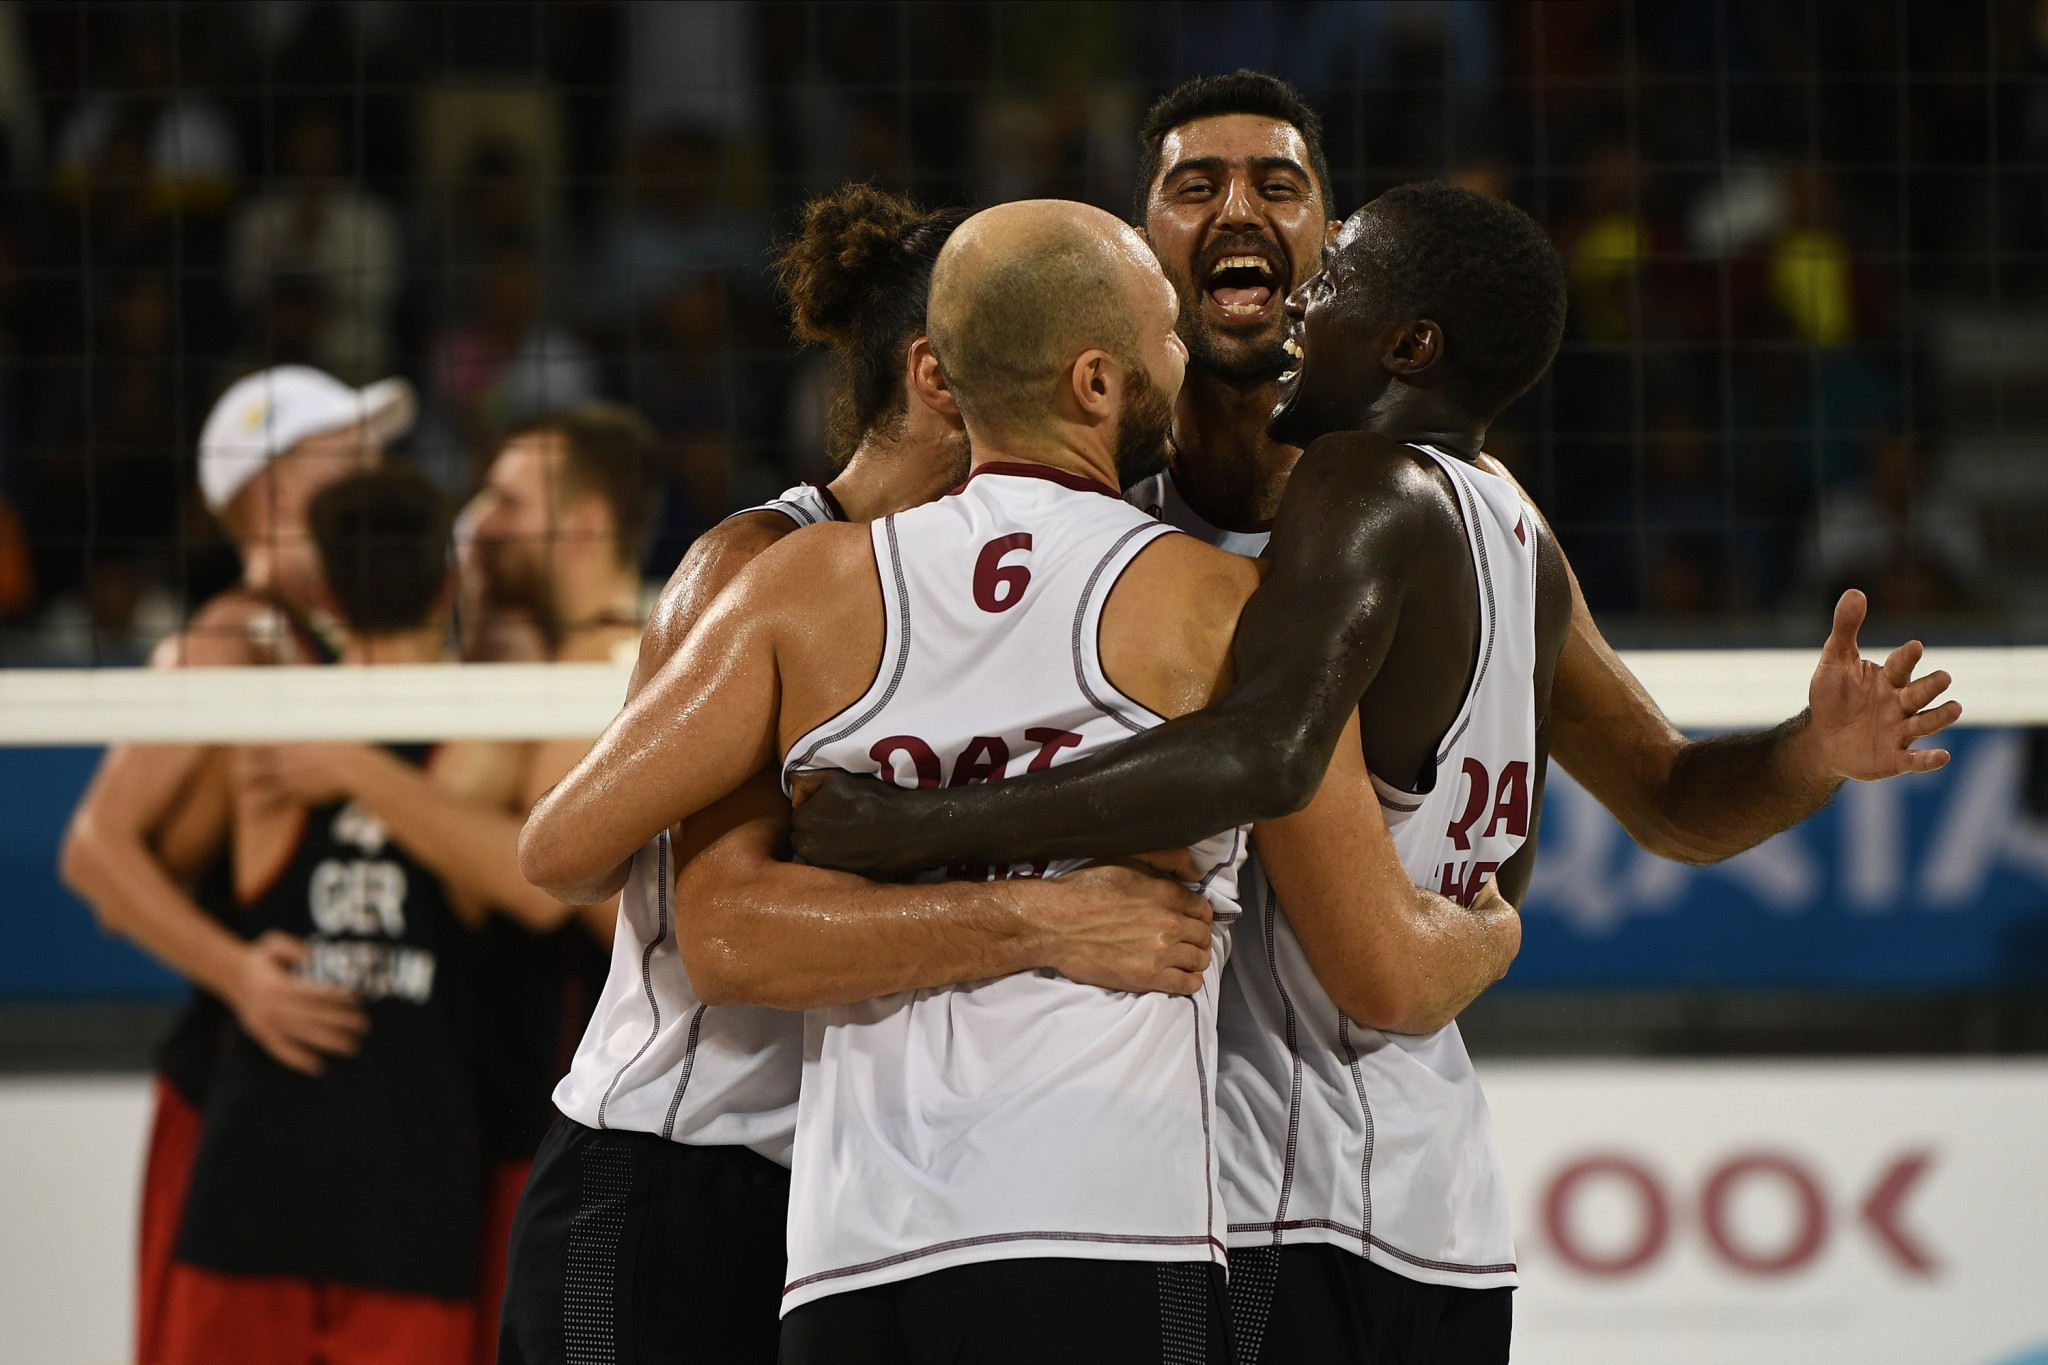 Hosts Qatar saw action in the 4x4 volleyball ©ANOC